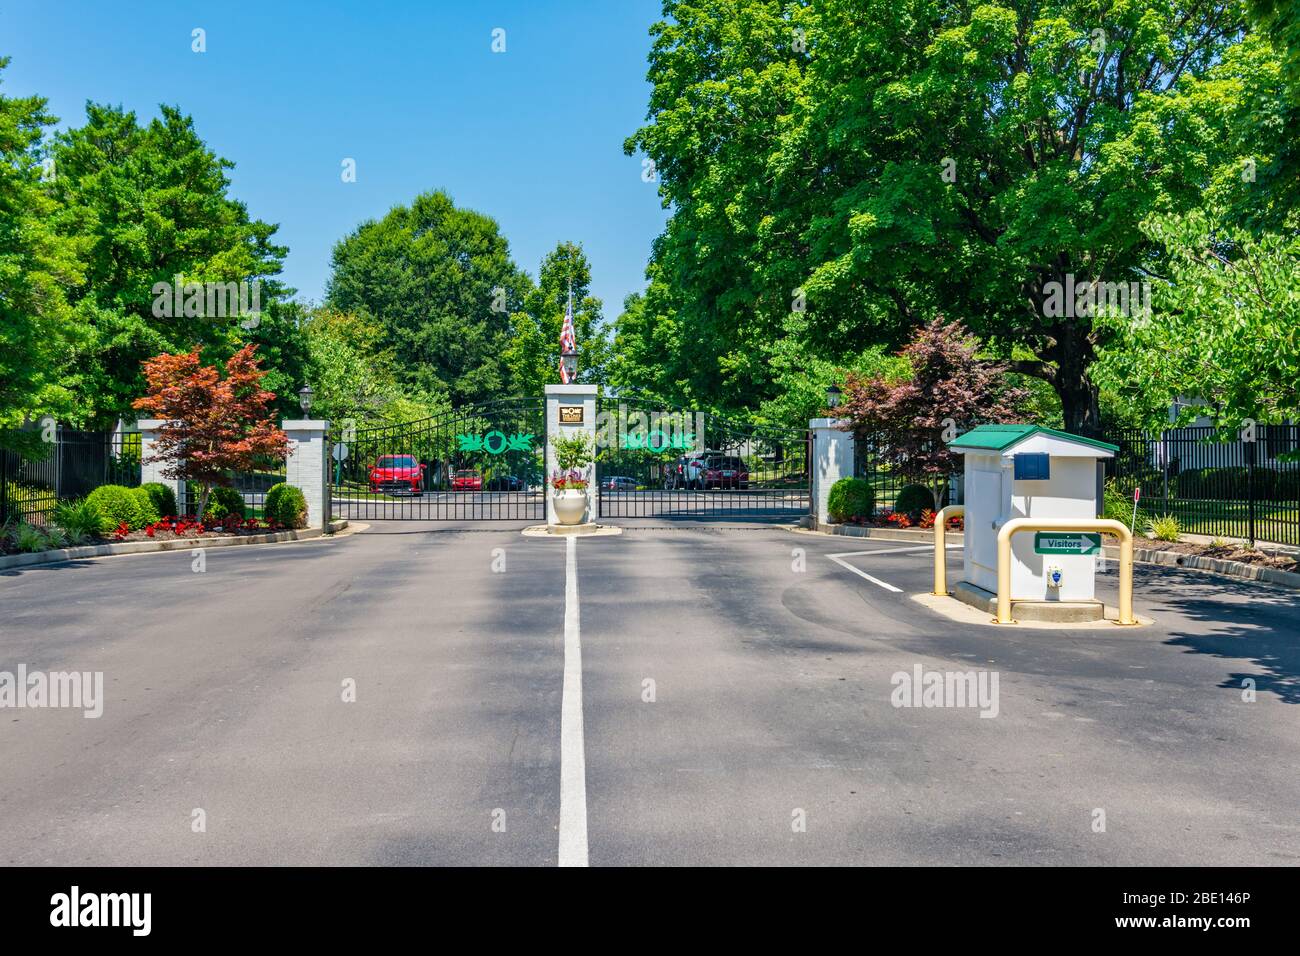 Gated entrance to upscale suburban neighborhood in Midwest America Stock Photo